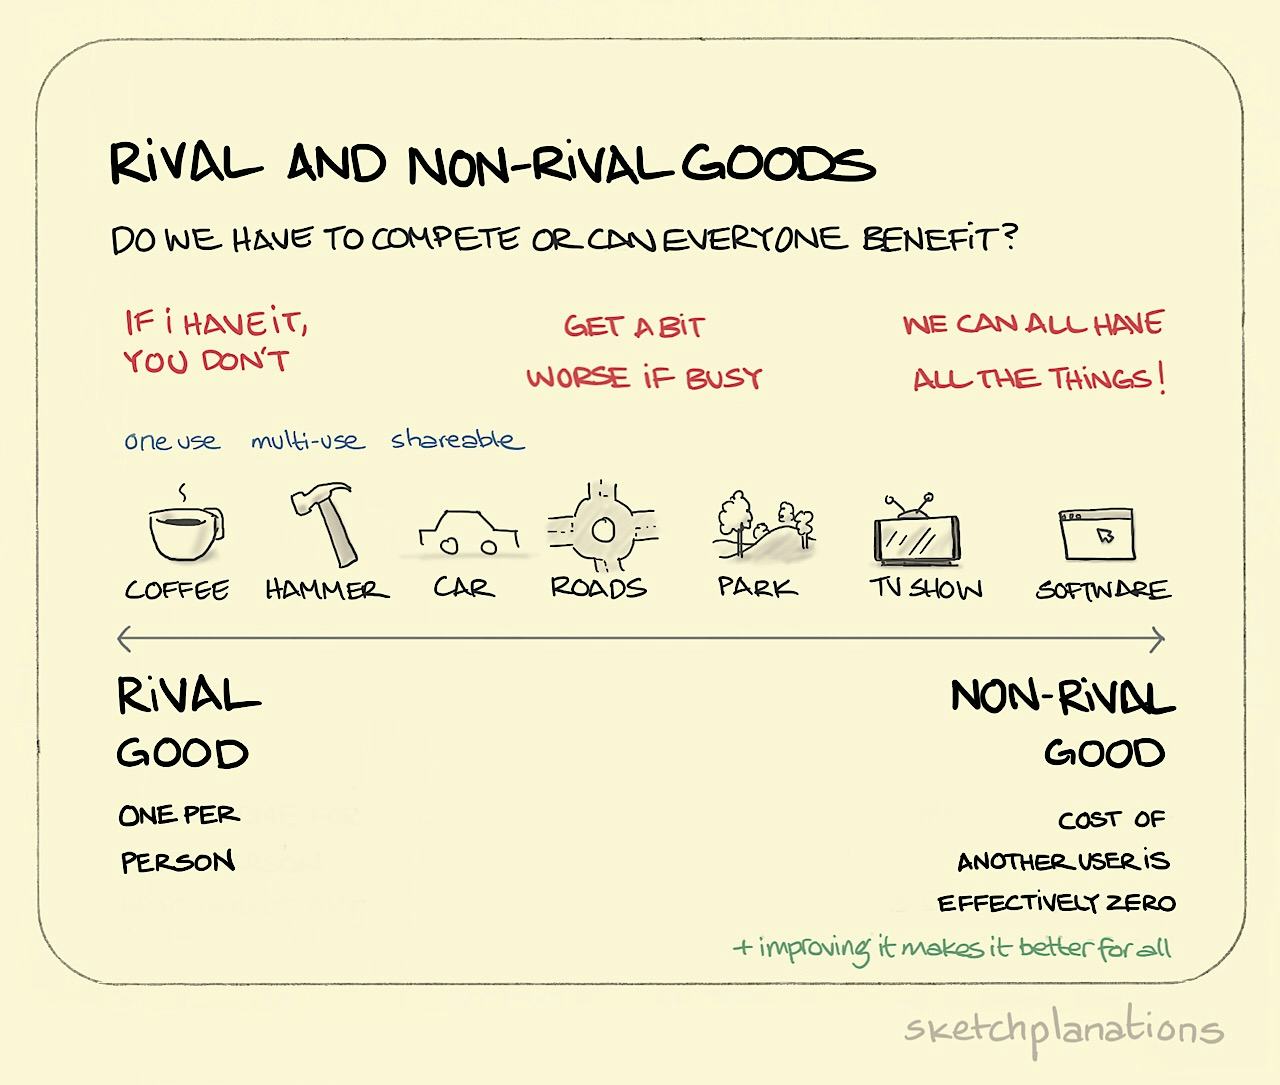 Rival and non-rival goods - Sketchplanations